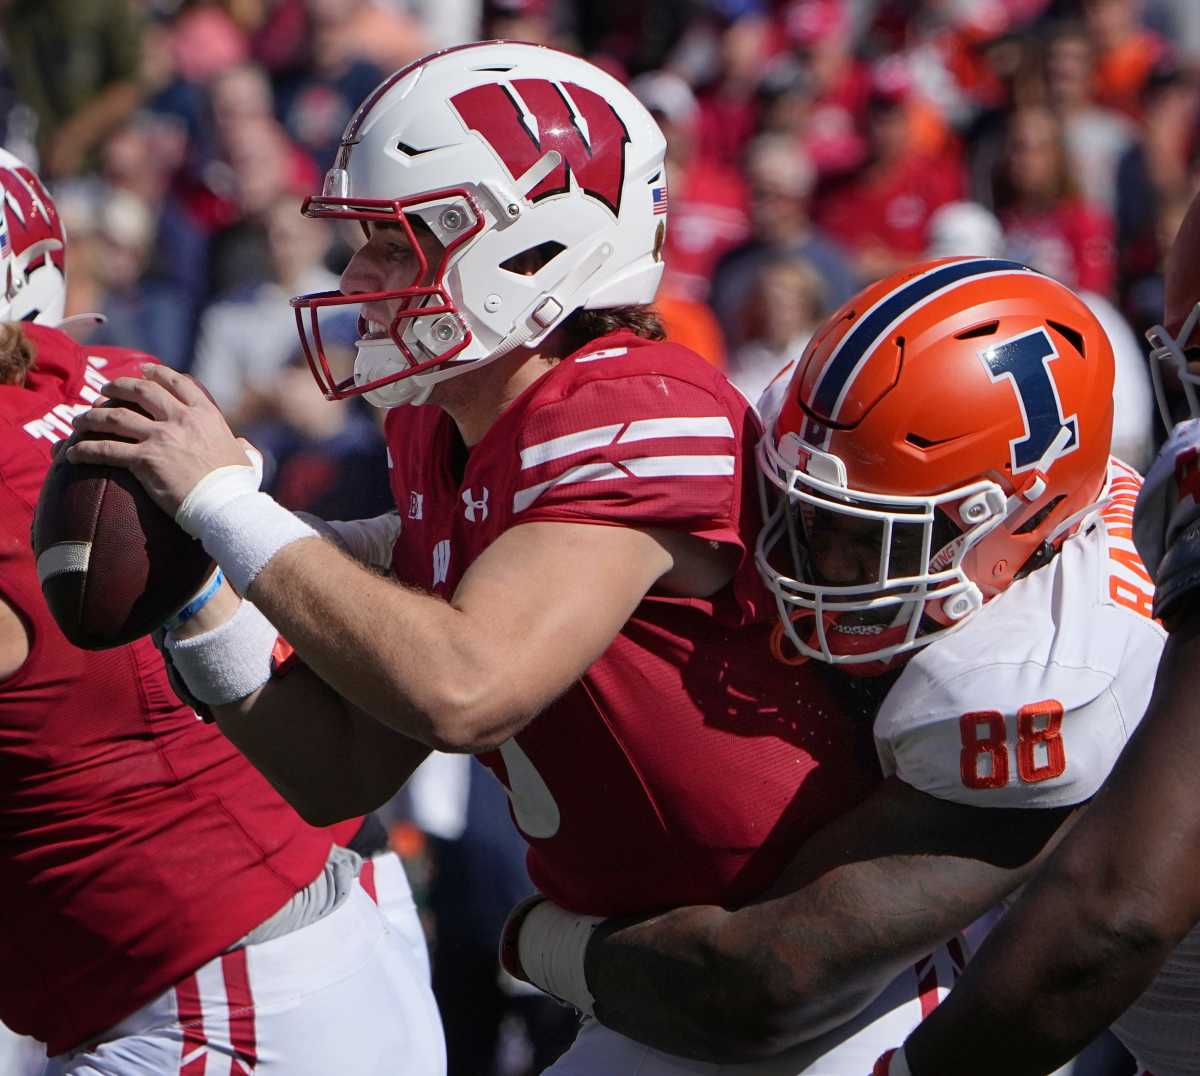 Wisconsin quarterback Graham Mertz (5) is sacked by Illinois defensive lineman Keith Randolph Jr. (88) during the fourth quarter of their game Saturday, October 1, 2022 at Camp Randall Stadium in Madison, Wis. Illinois beat Wisconsin 34-10.